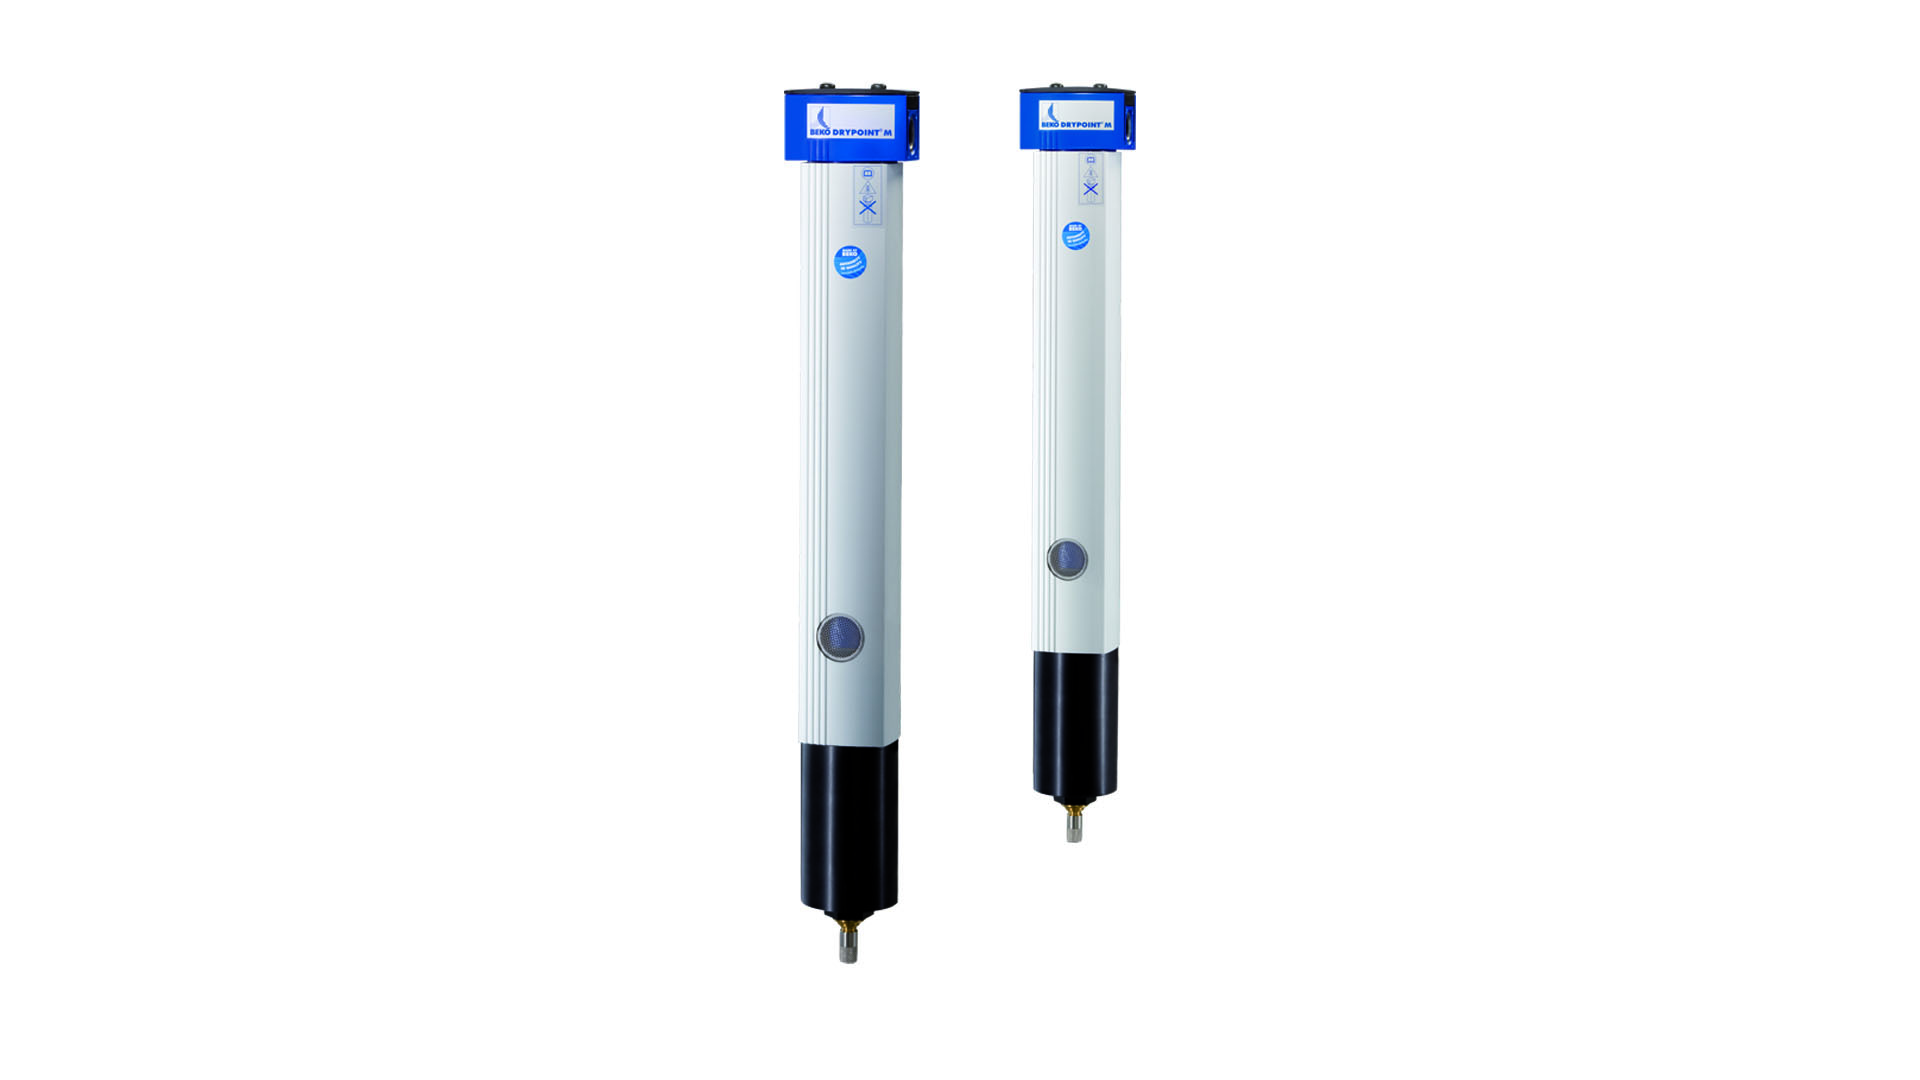 BEKO TECHNOLOGIES - Compressed air technology